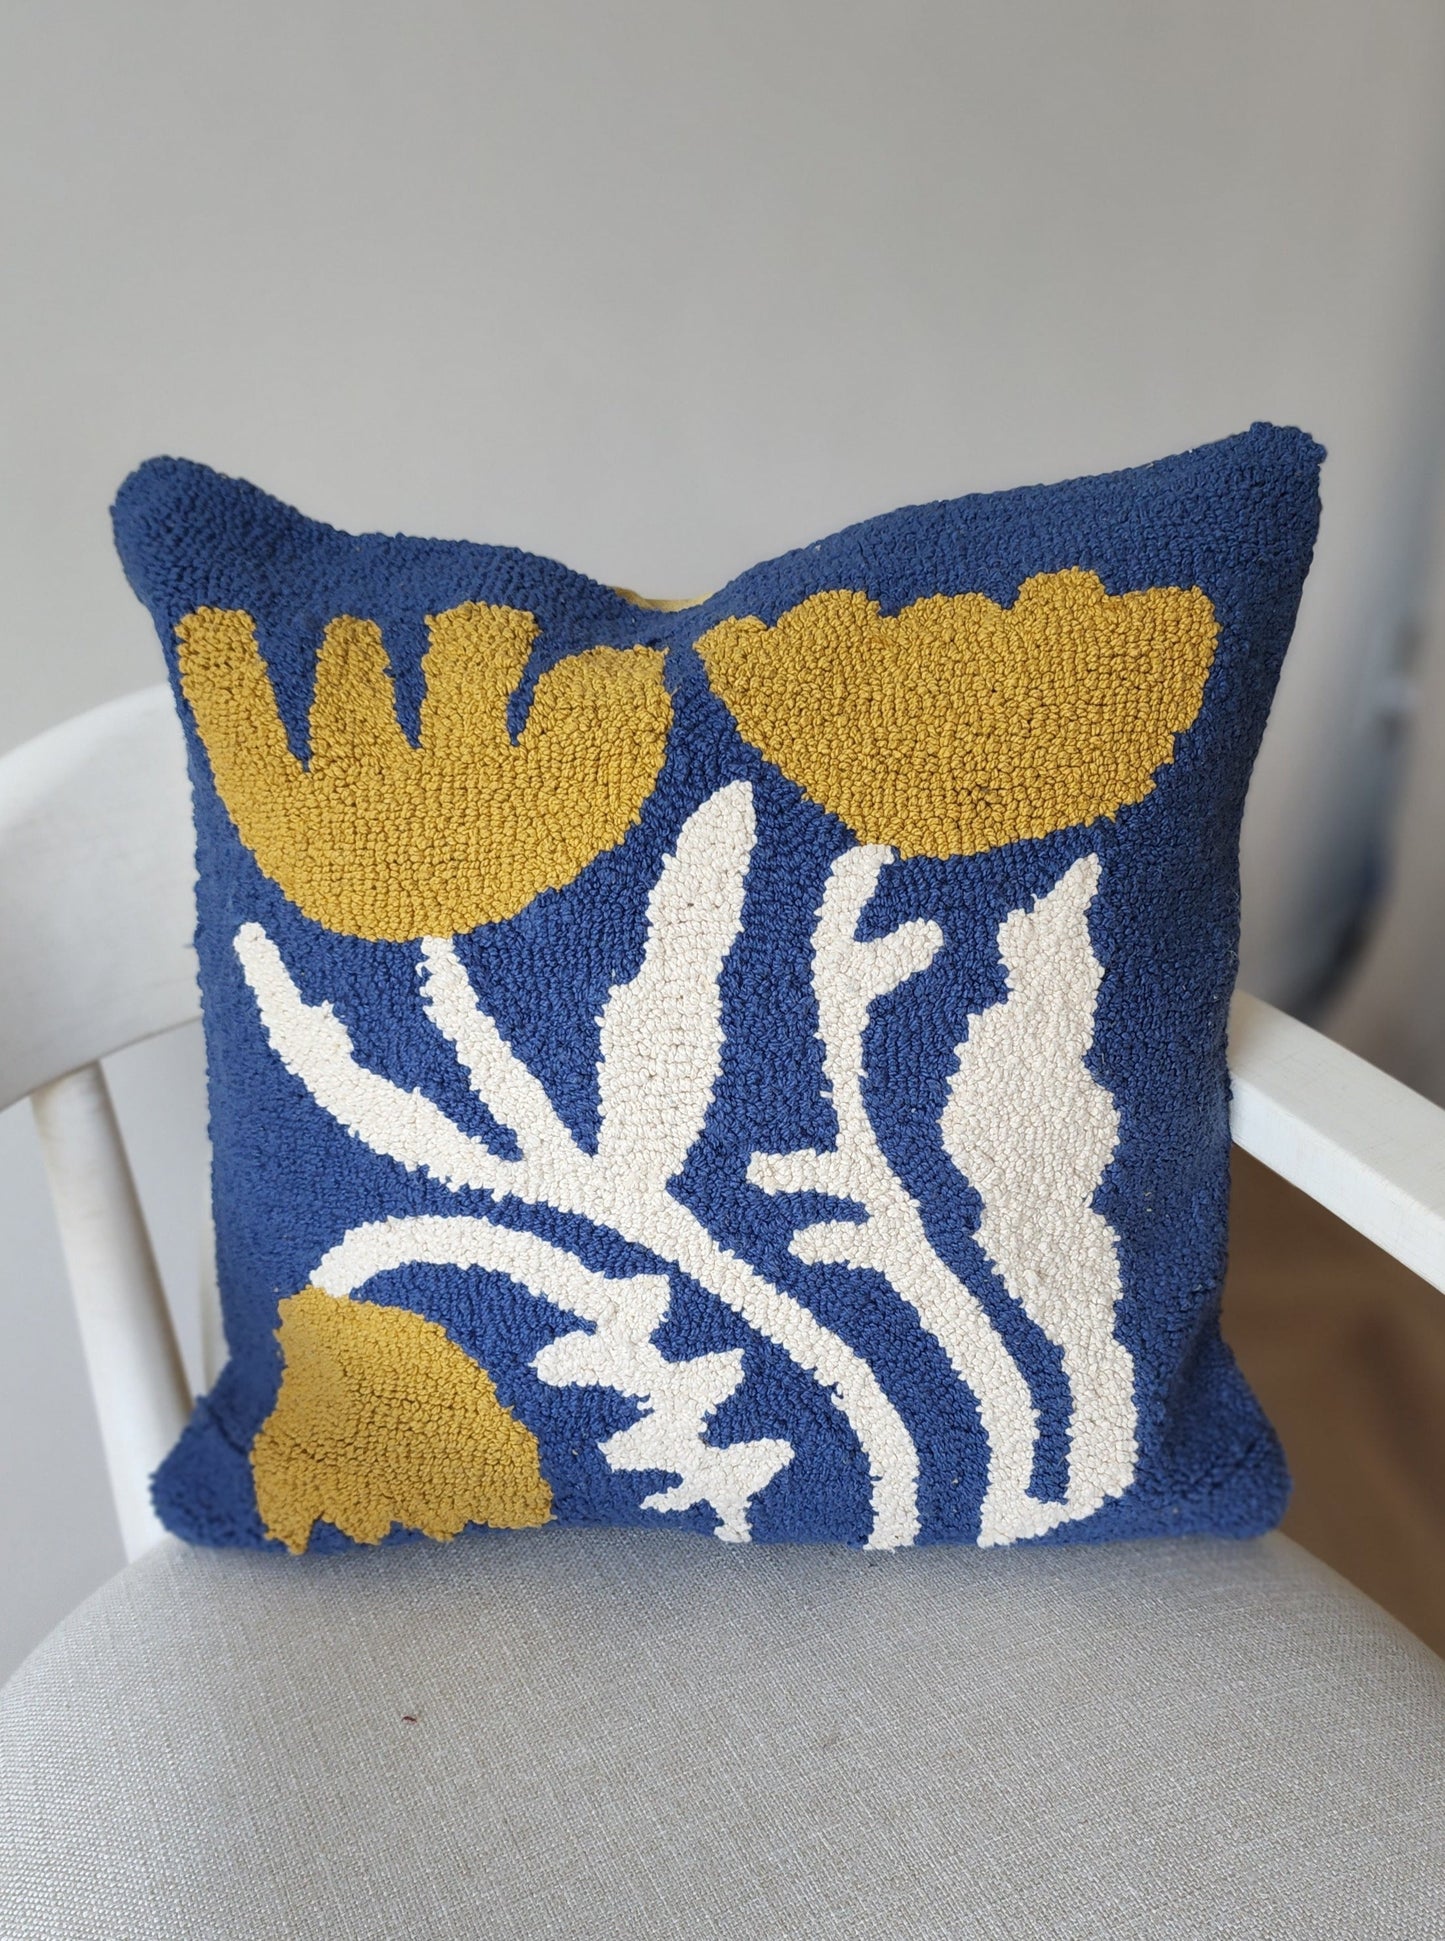 Groovy Cotton Punch Needle Pillow - Blue and Mustard